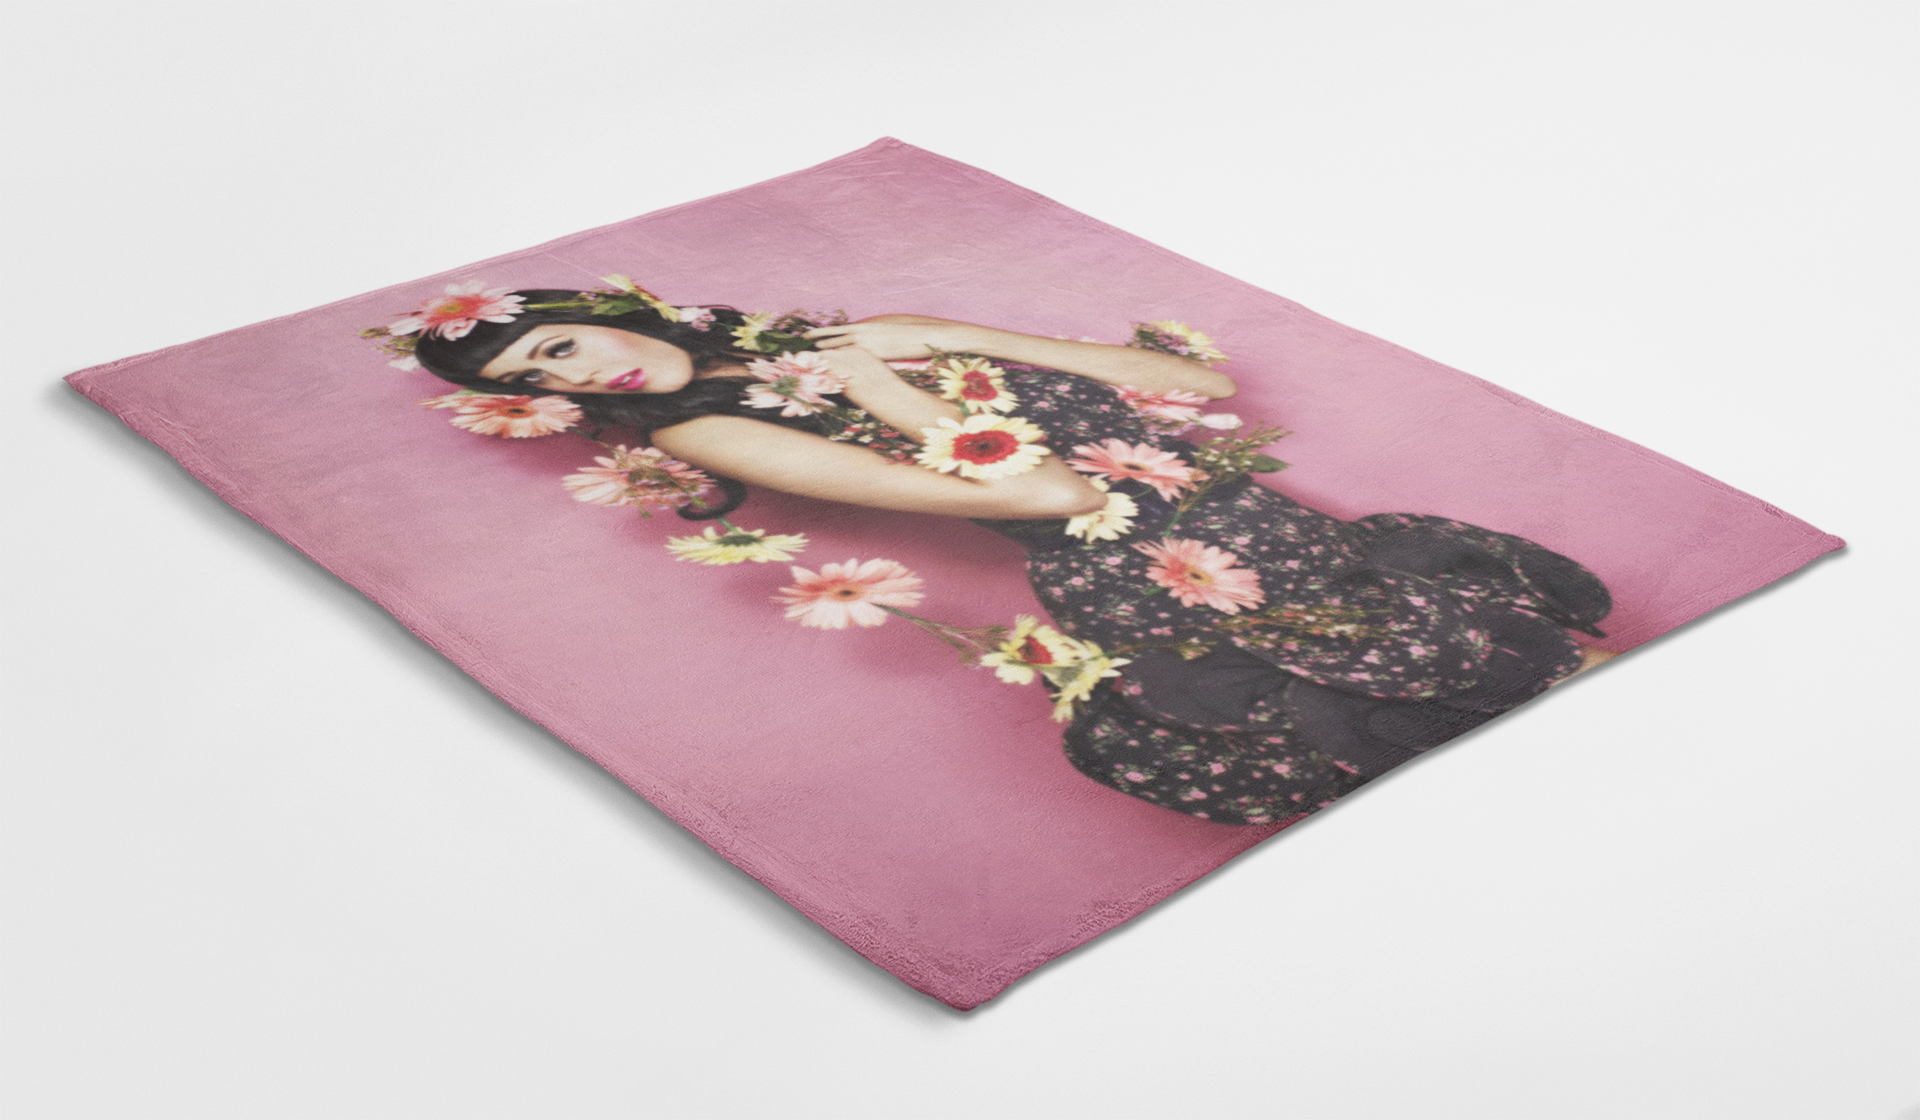 Katy Perry Sunflower Pose Blanket